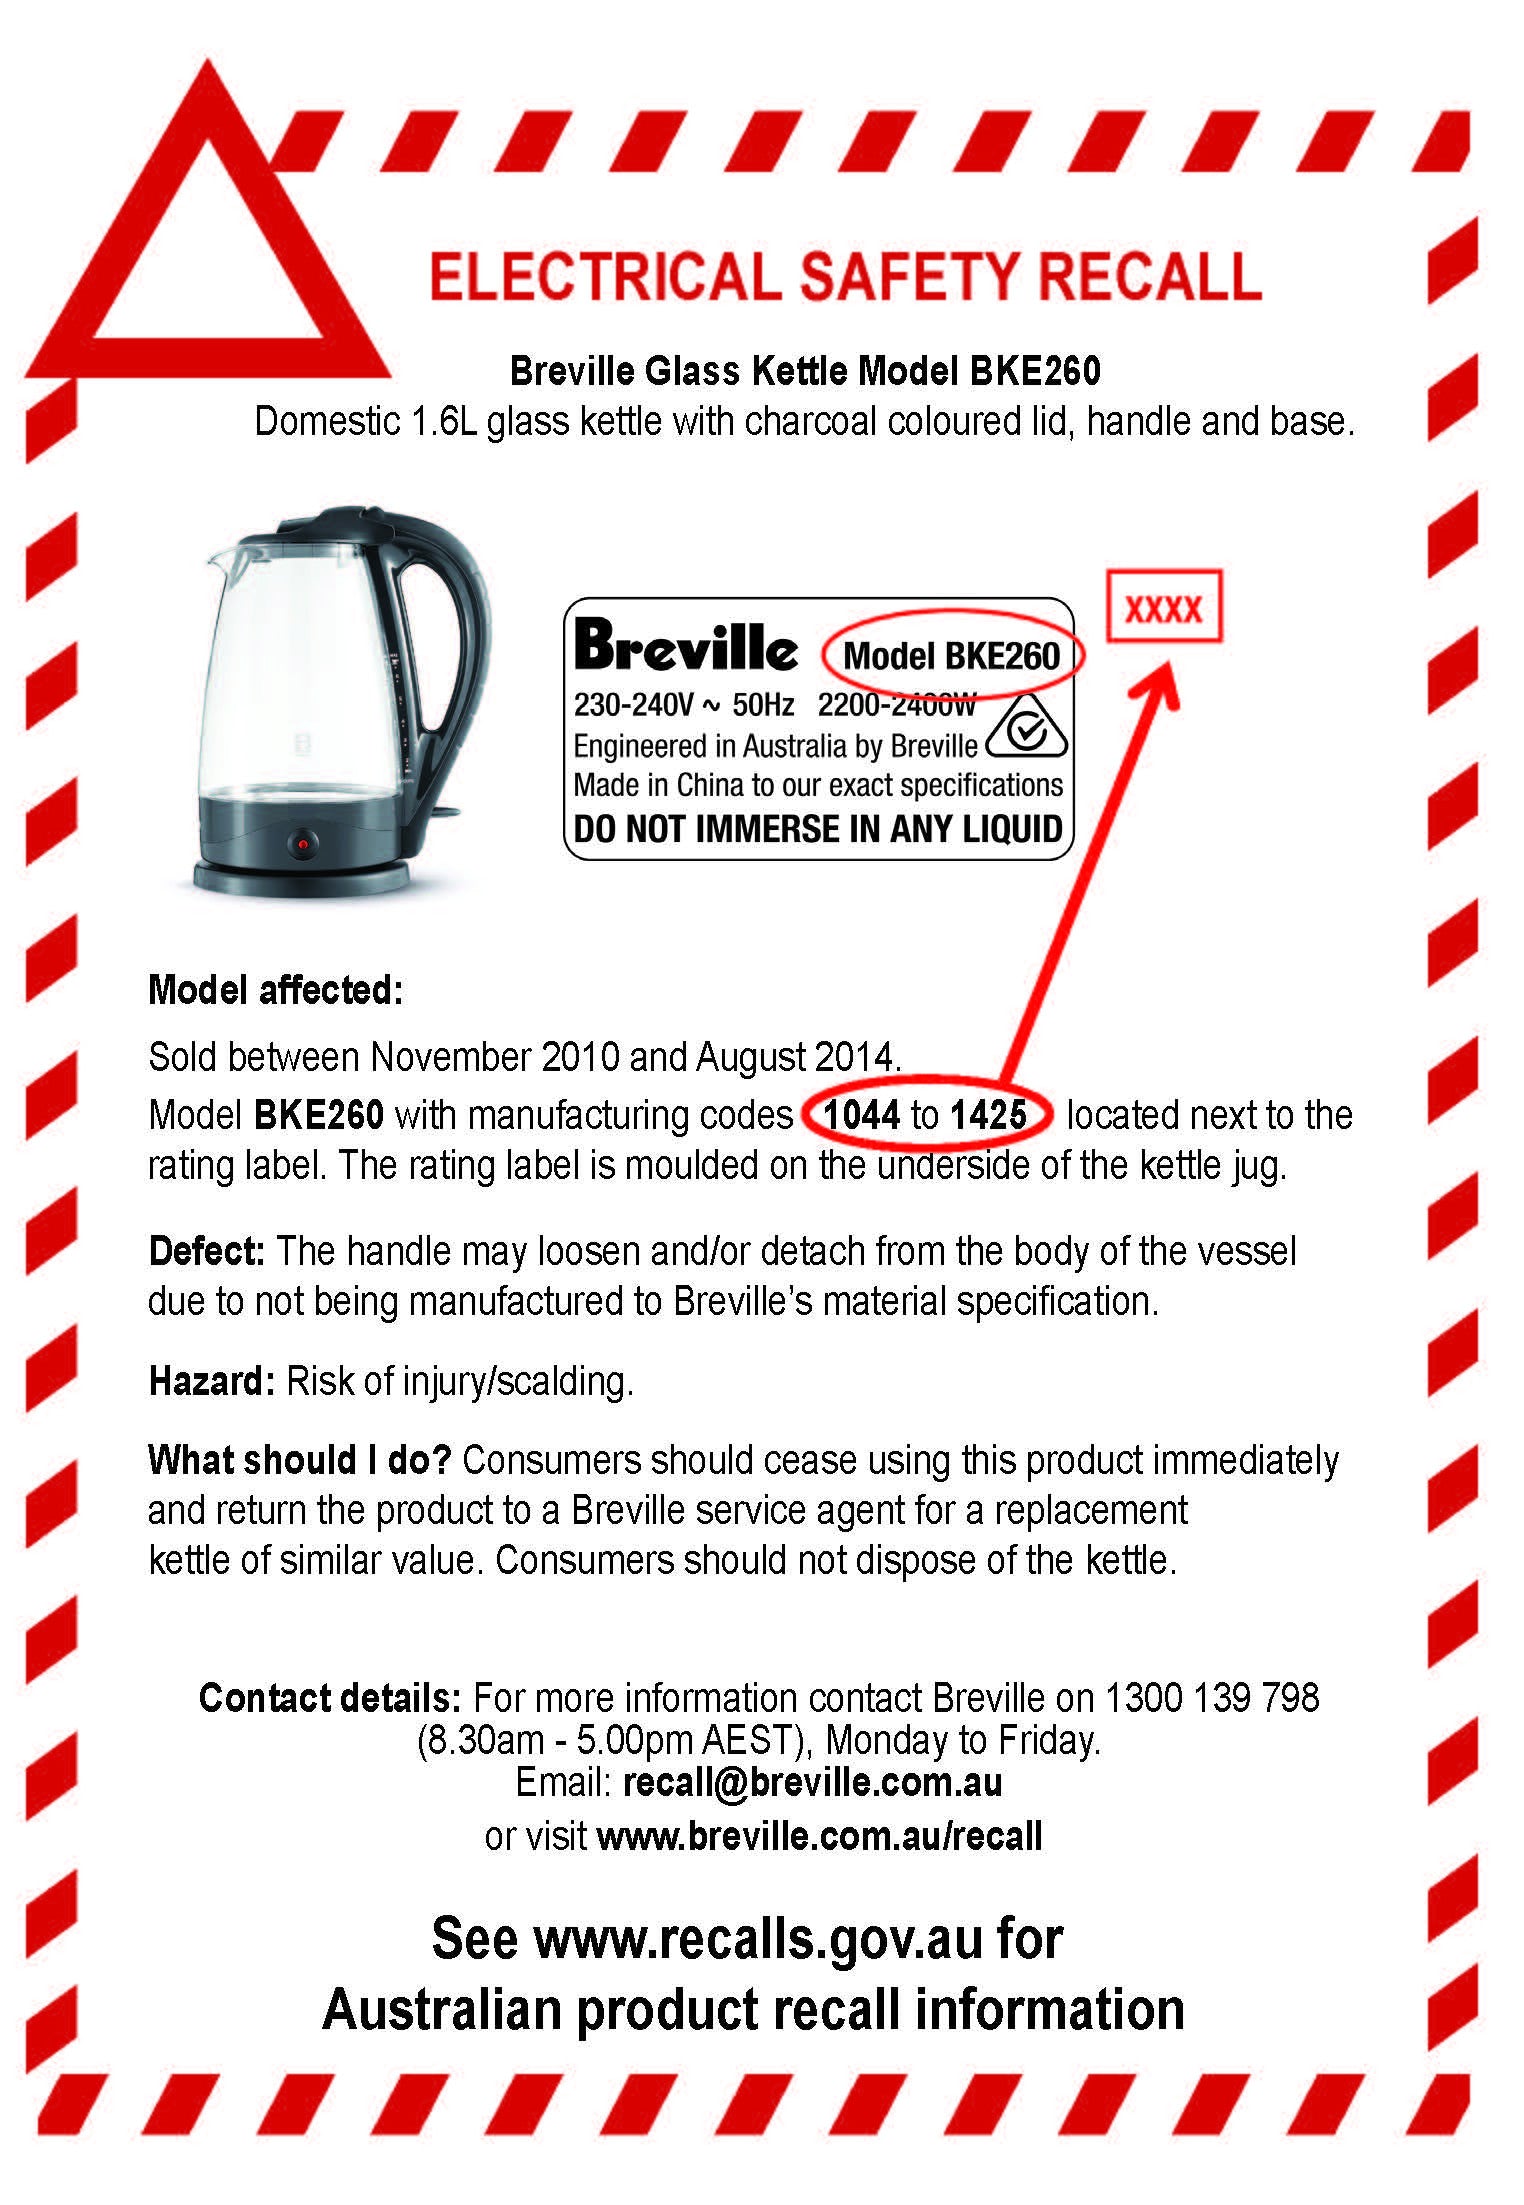 Breville Recall Ad Revised